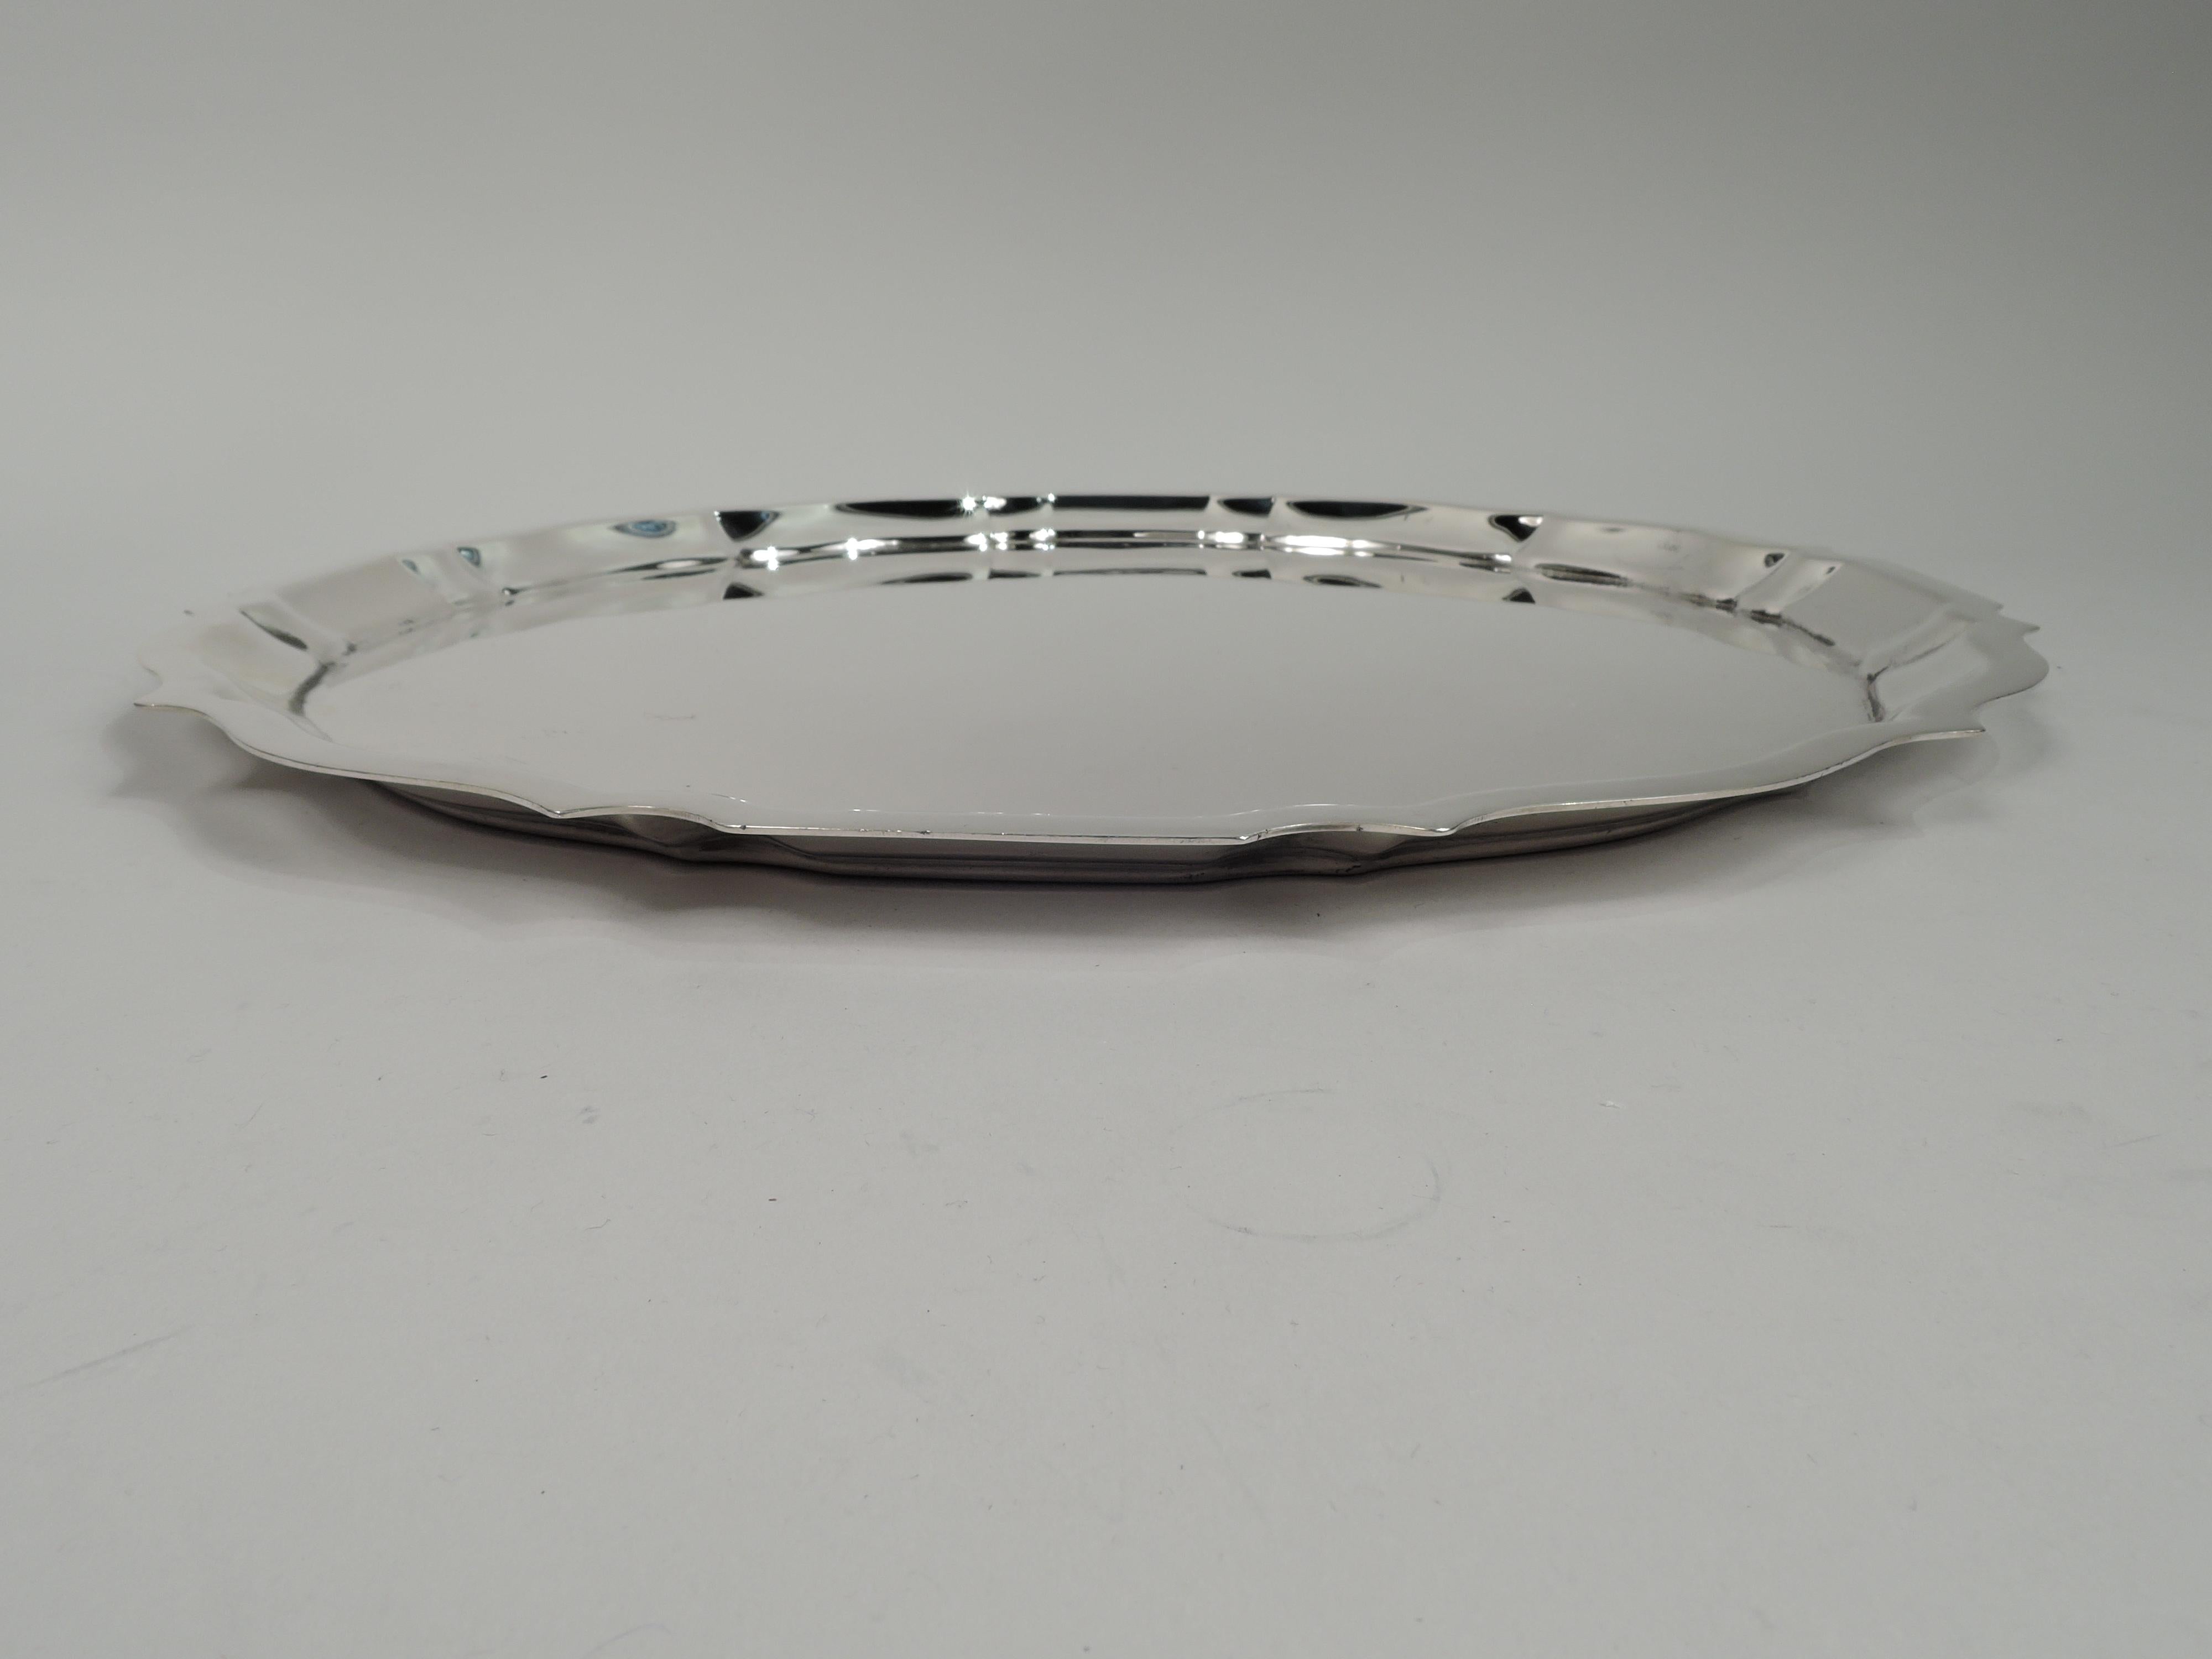 Chippendale sterling silver serving tray. Made by Gorham in Providence in 1944. Round with flat curvilinear ogee rim. A large and heavy piece in this pattern. Fully marked including maker’s stamp, no. 42613, and date code. Weight: 38.4 troy ounces. 